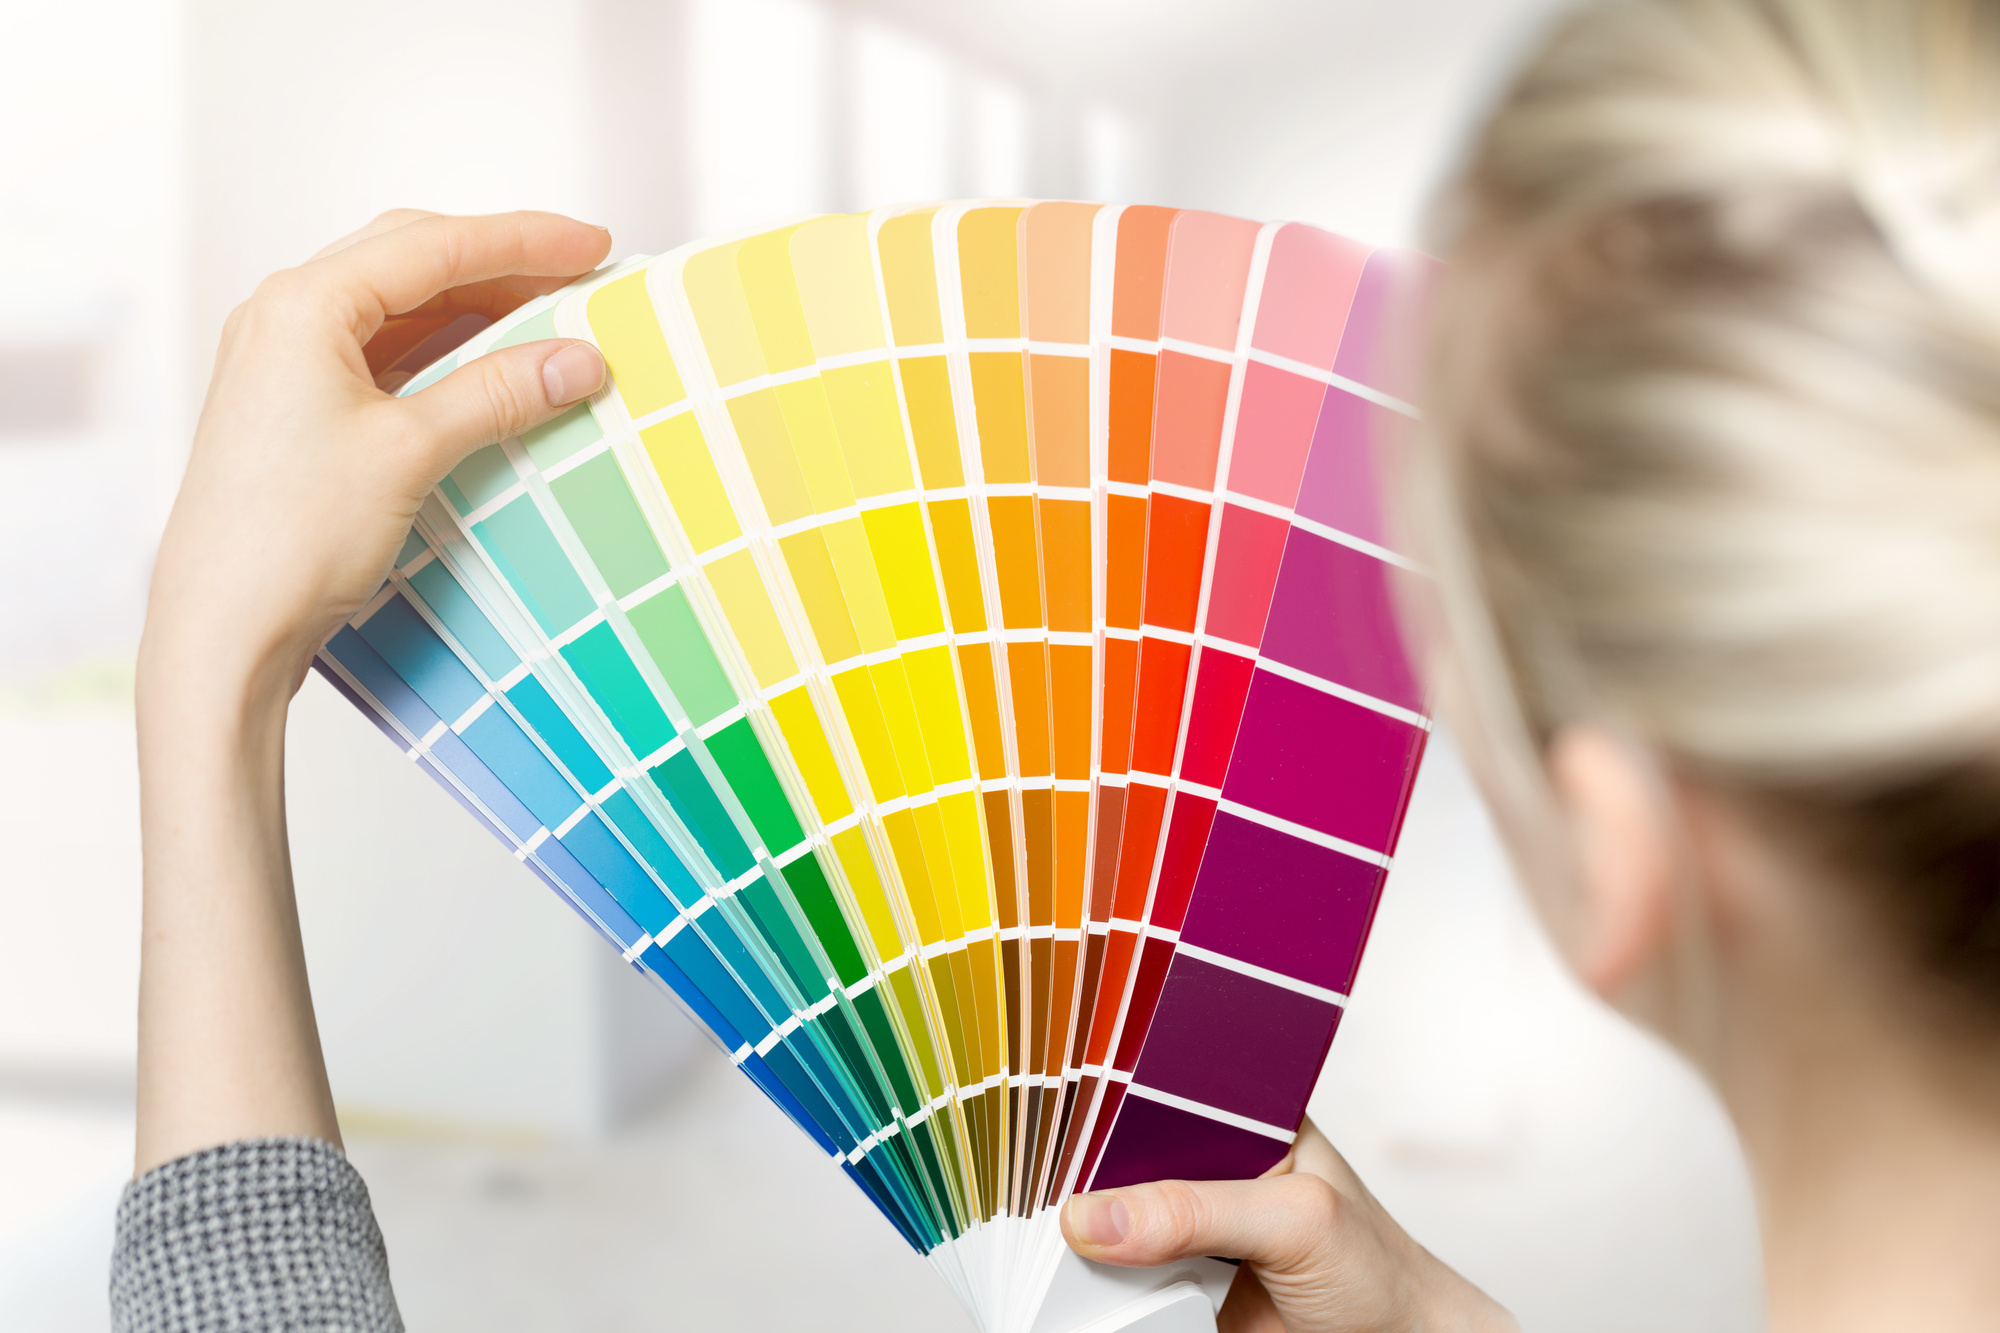 How to choose the right color for your business logo